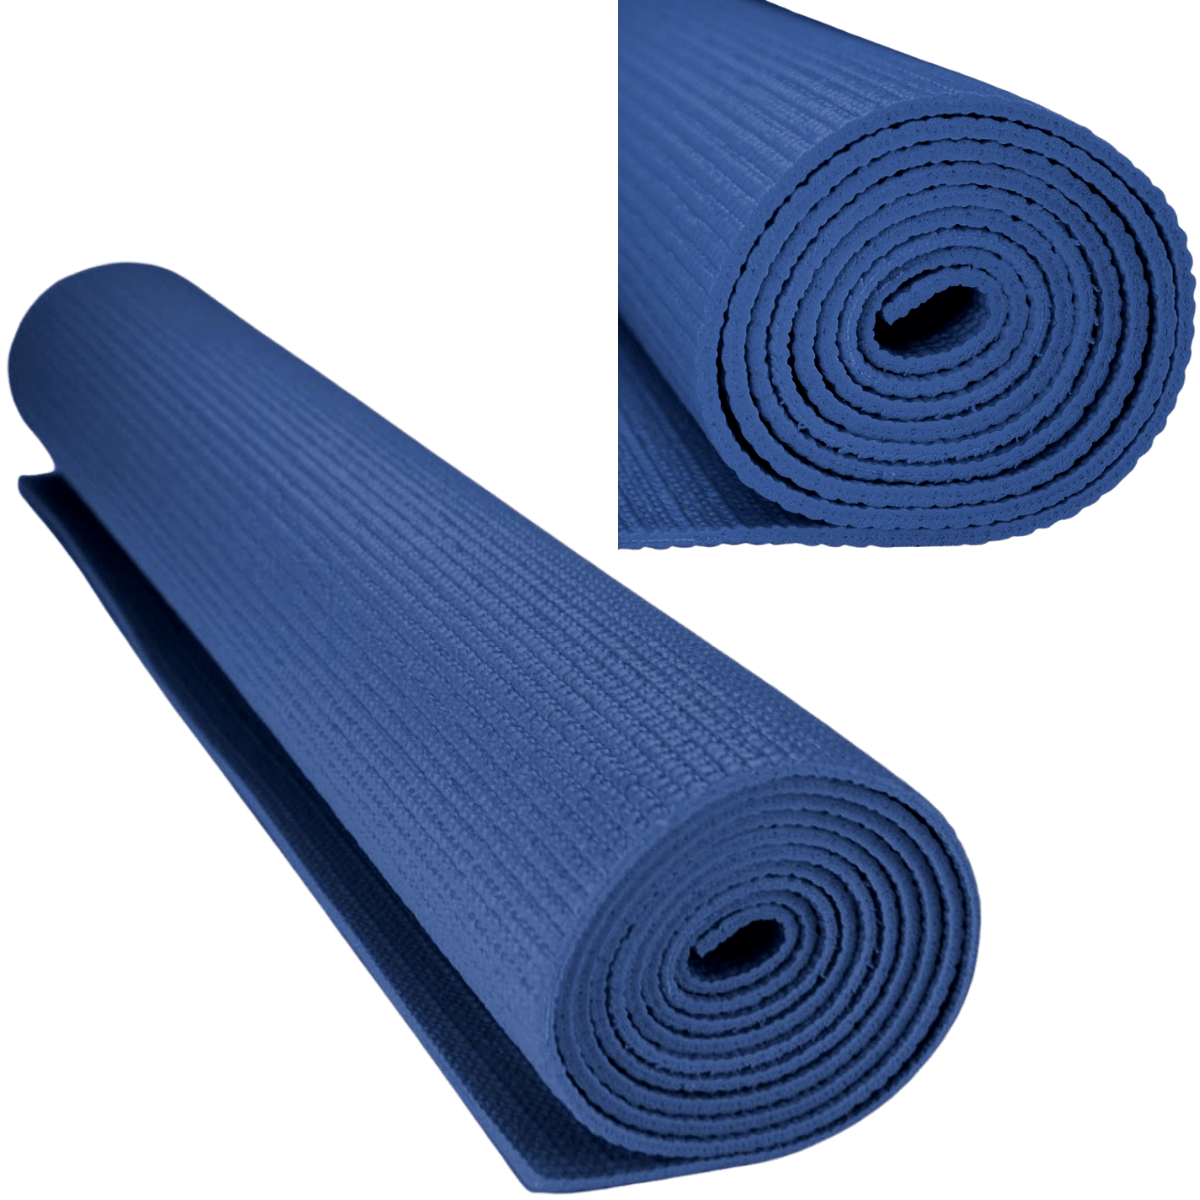 Performance Yoga Mat with Carrying Straps - VirtuousWares:Global